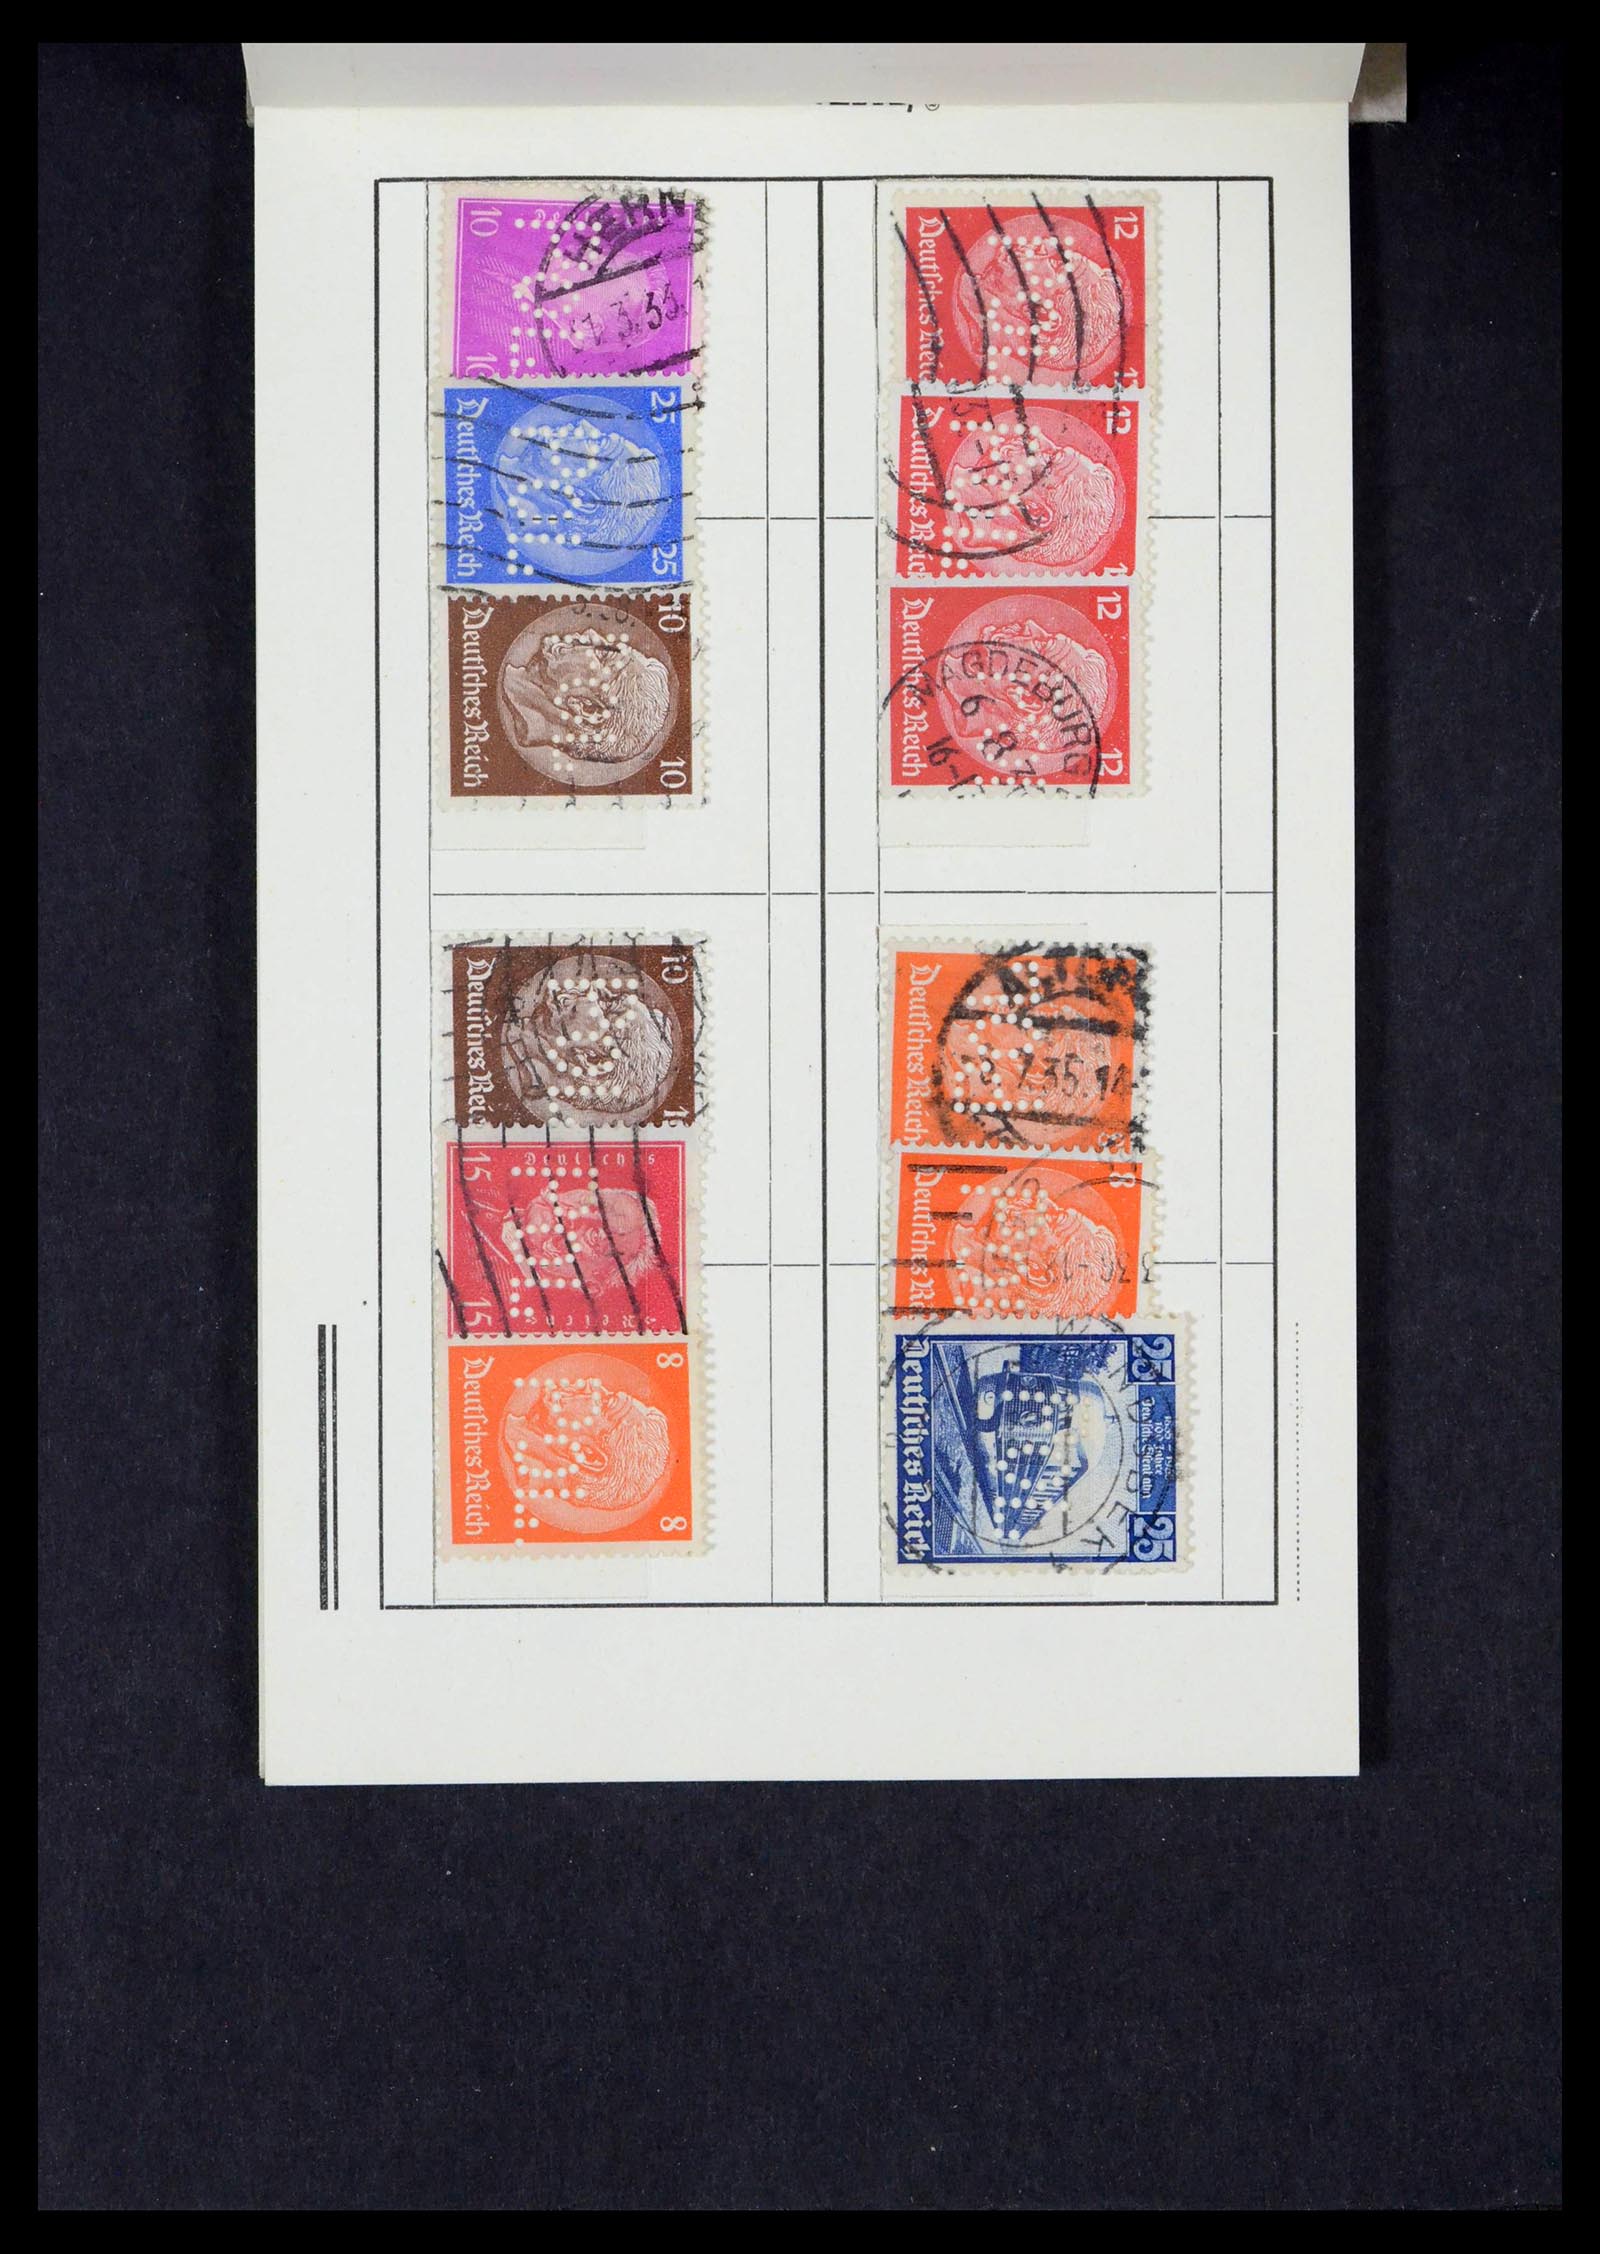 39458 0019 - Stamp collection 39458 Germany POL lochungen 1926-1955.